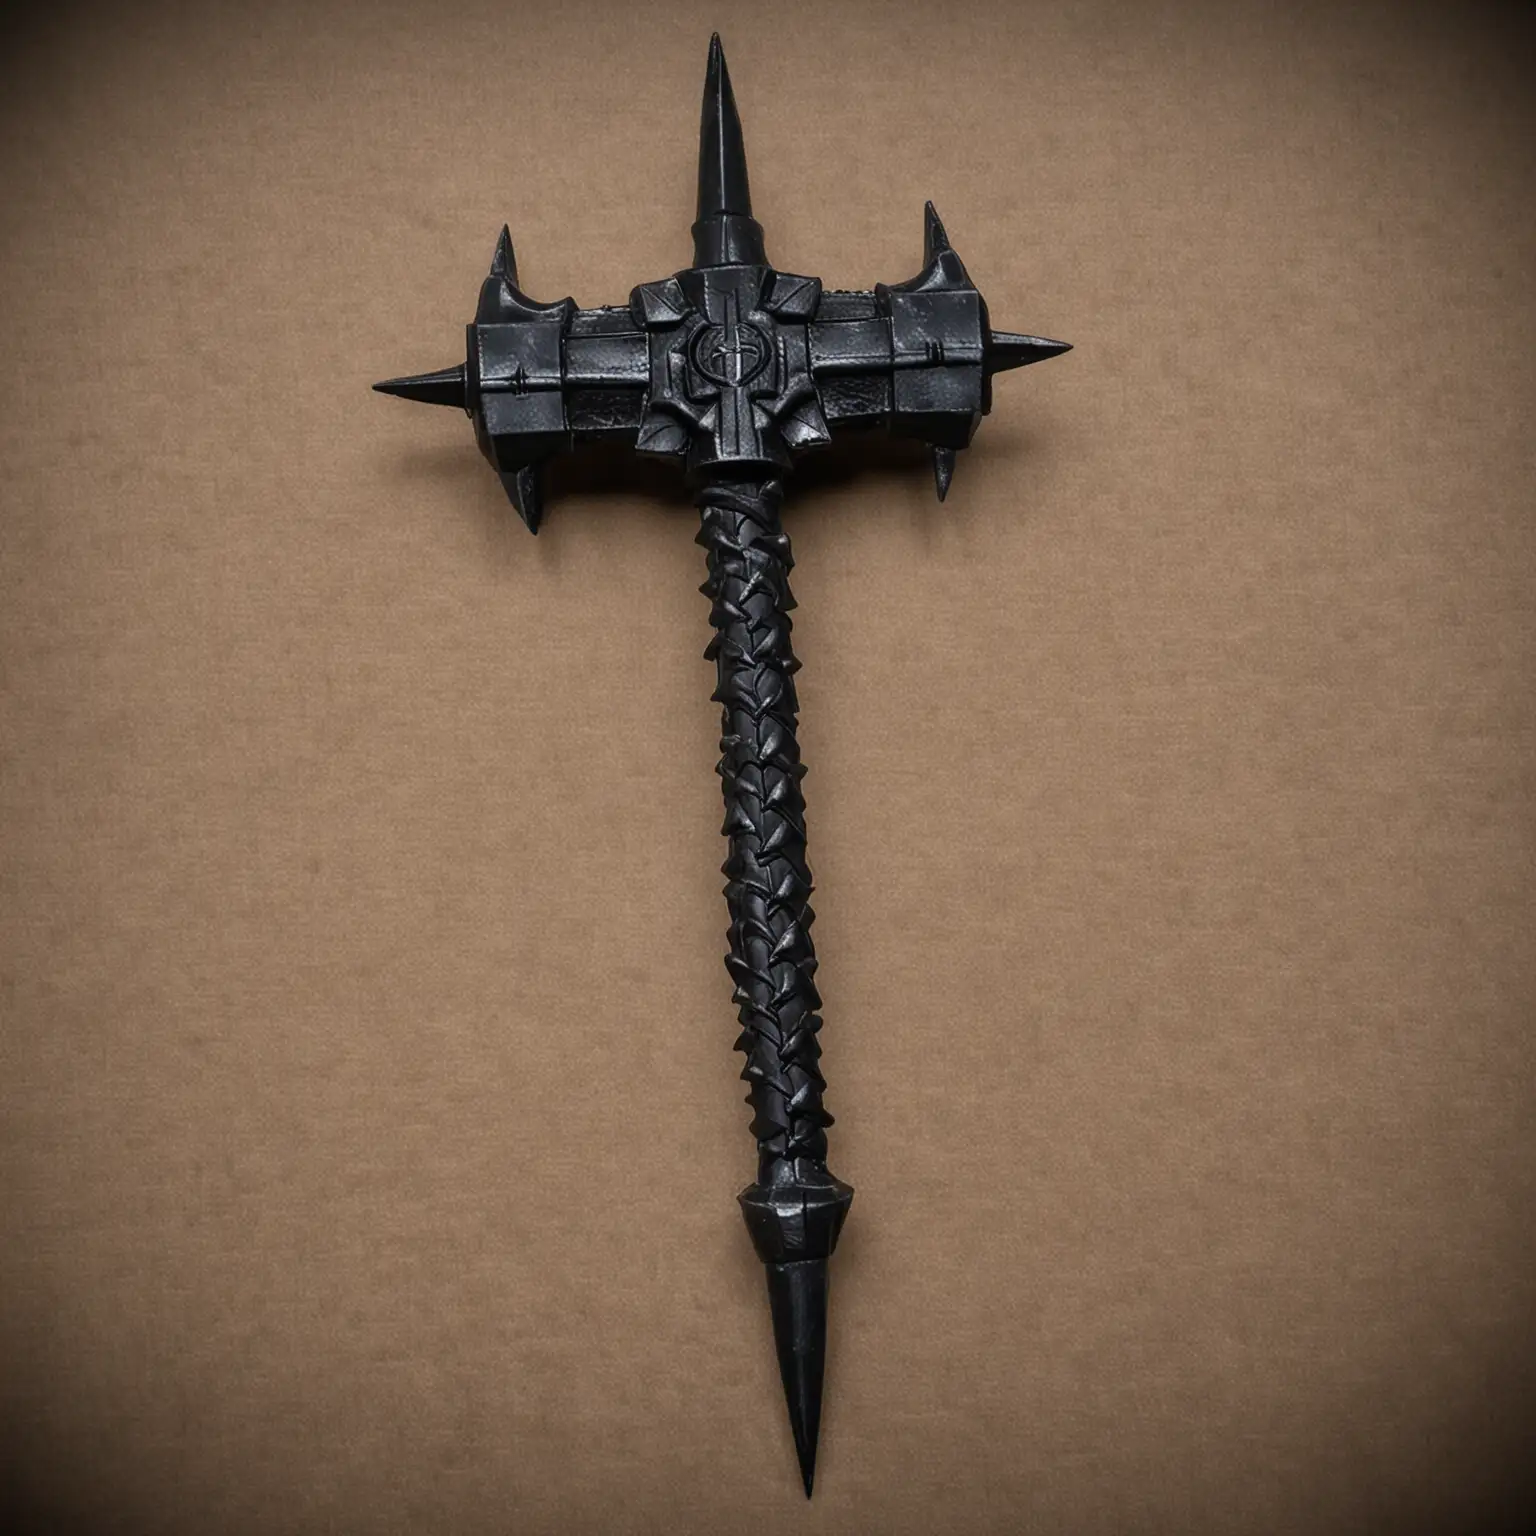 HighQuality-Black-Battle-Hammer-with-Spikes